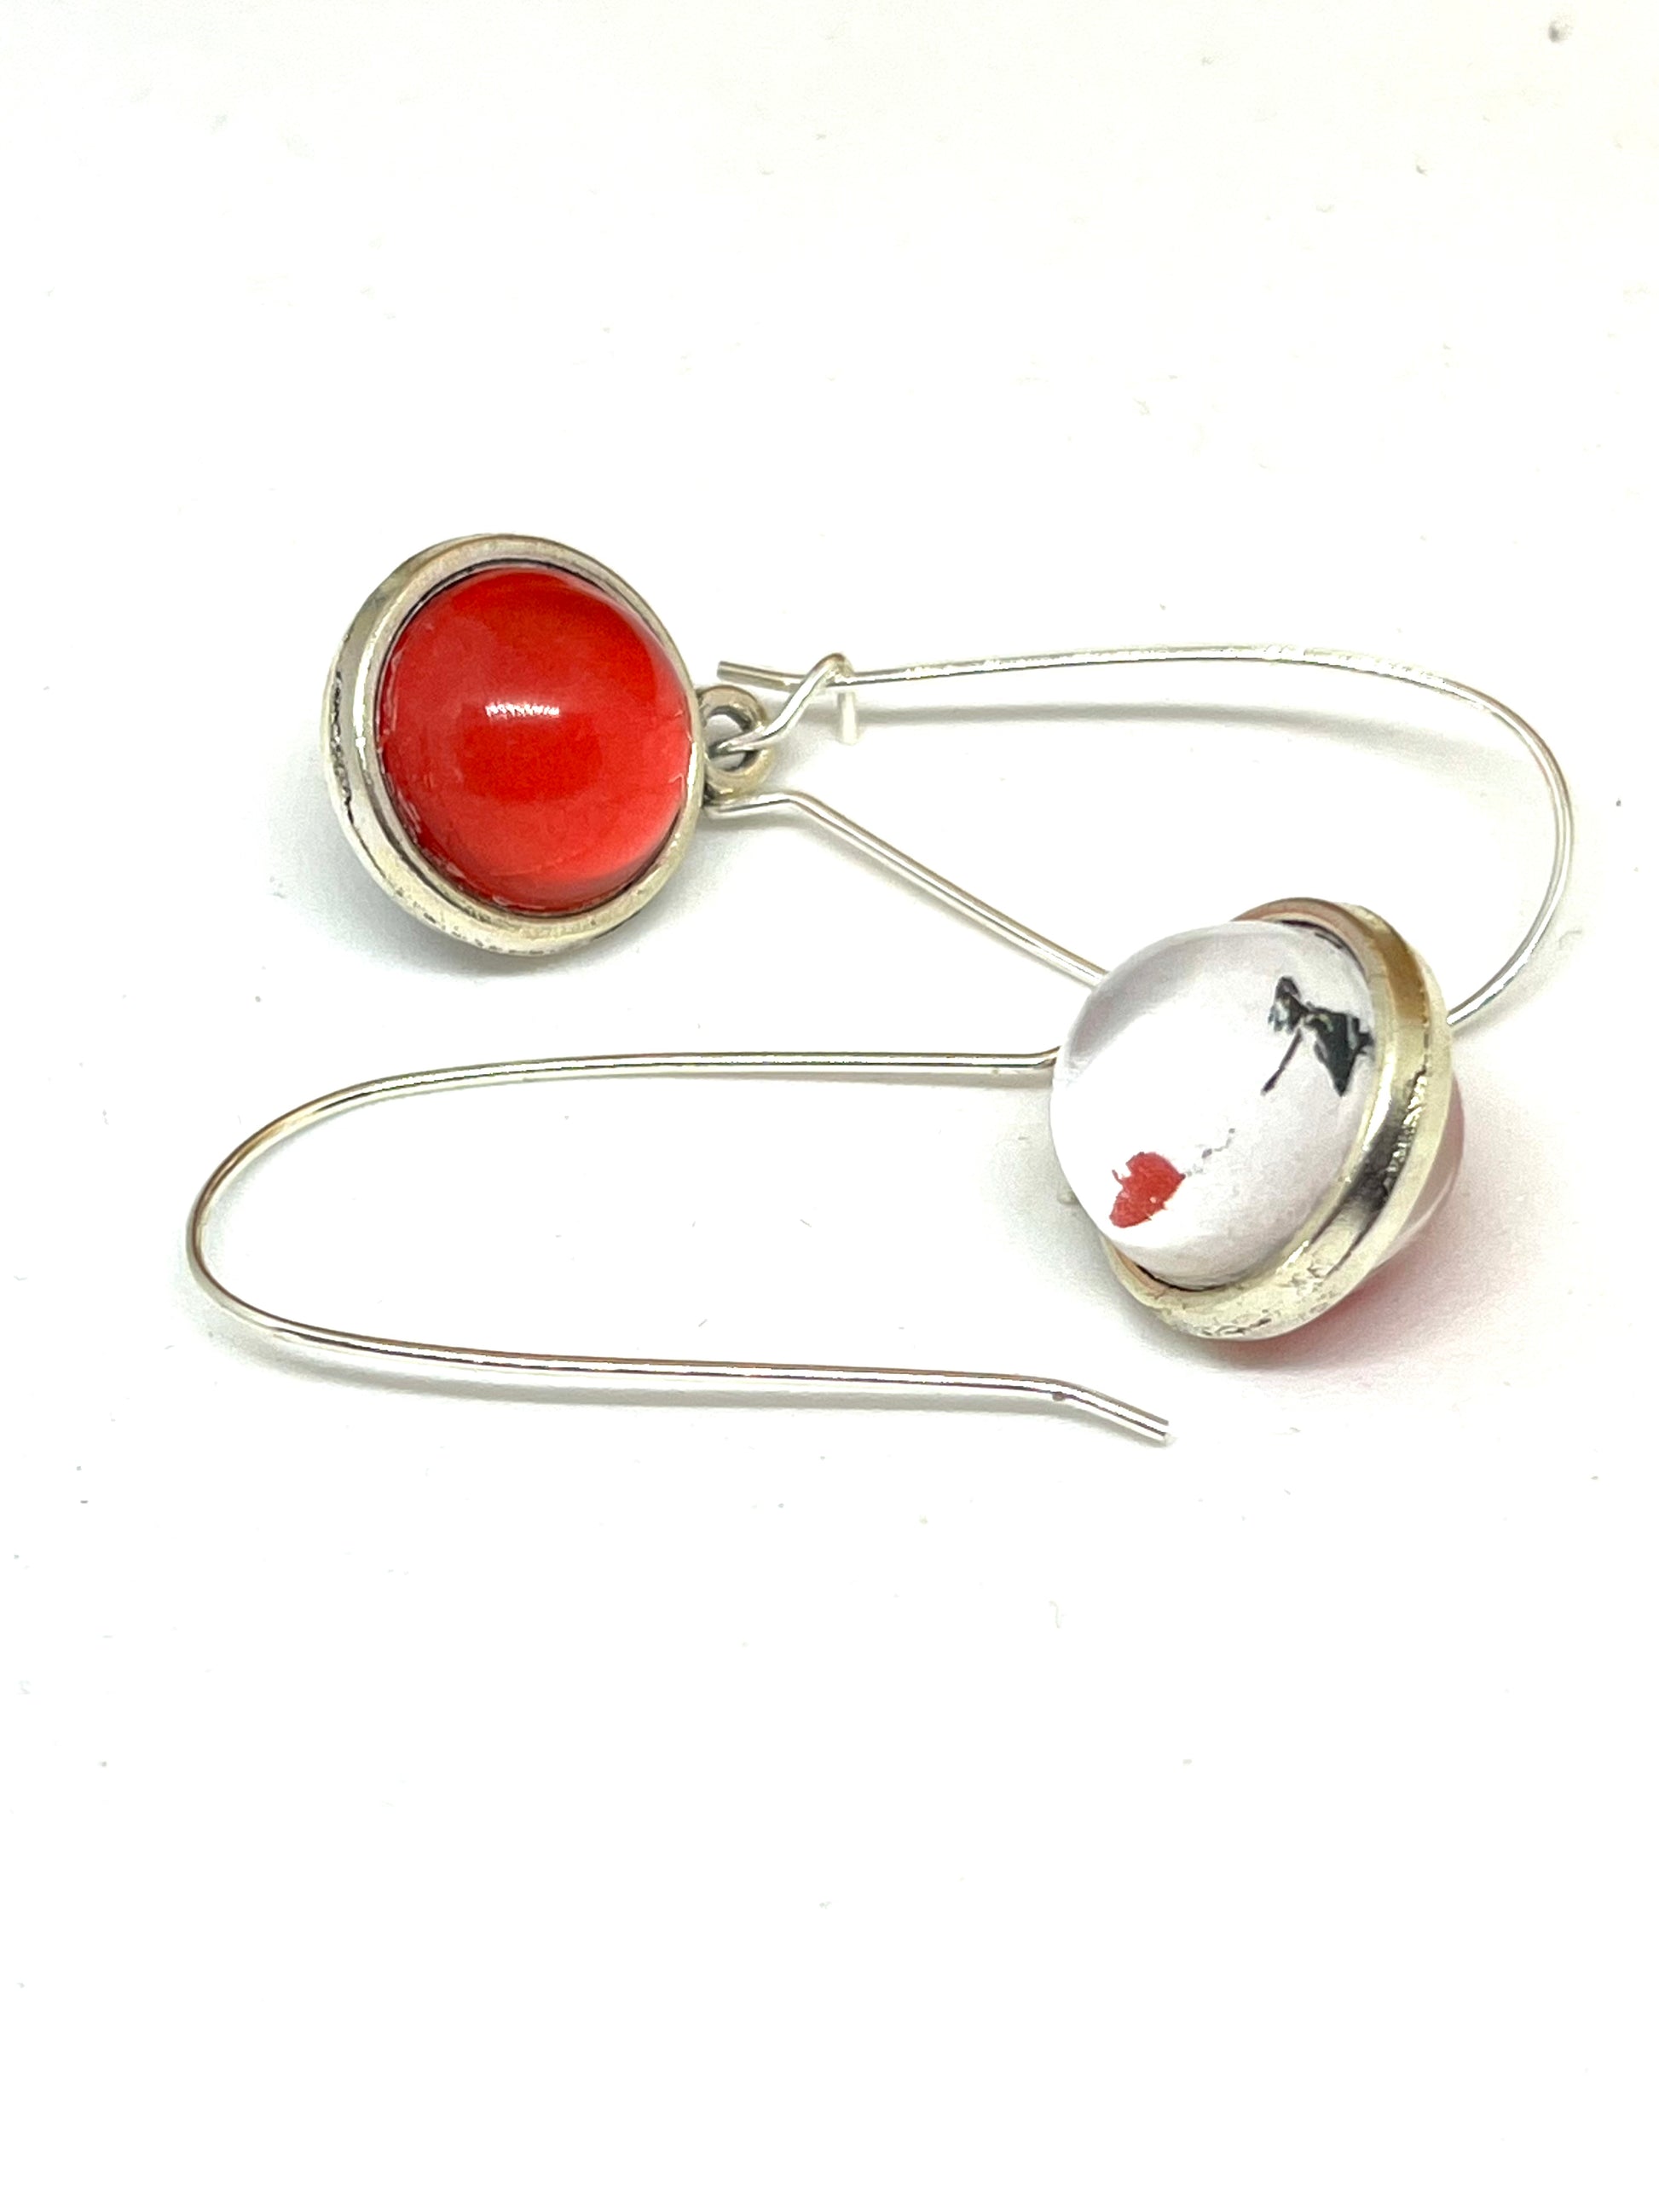 Double sided glass dome earrings with Banksy on one side and red on the other